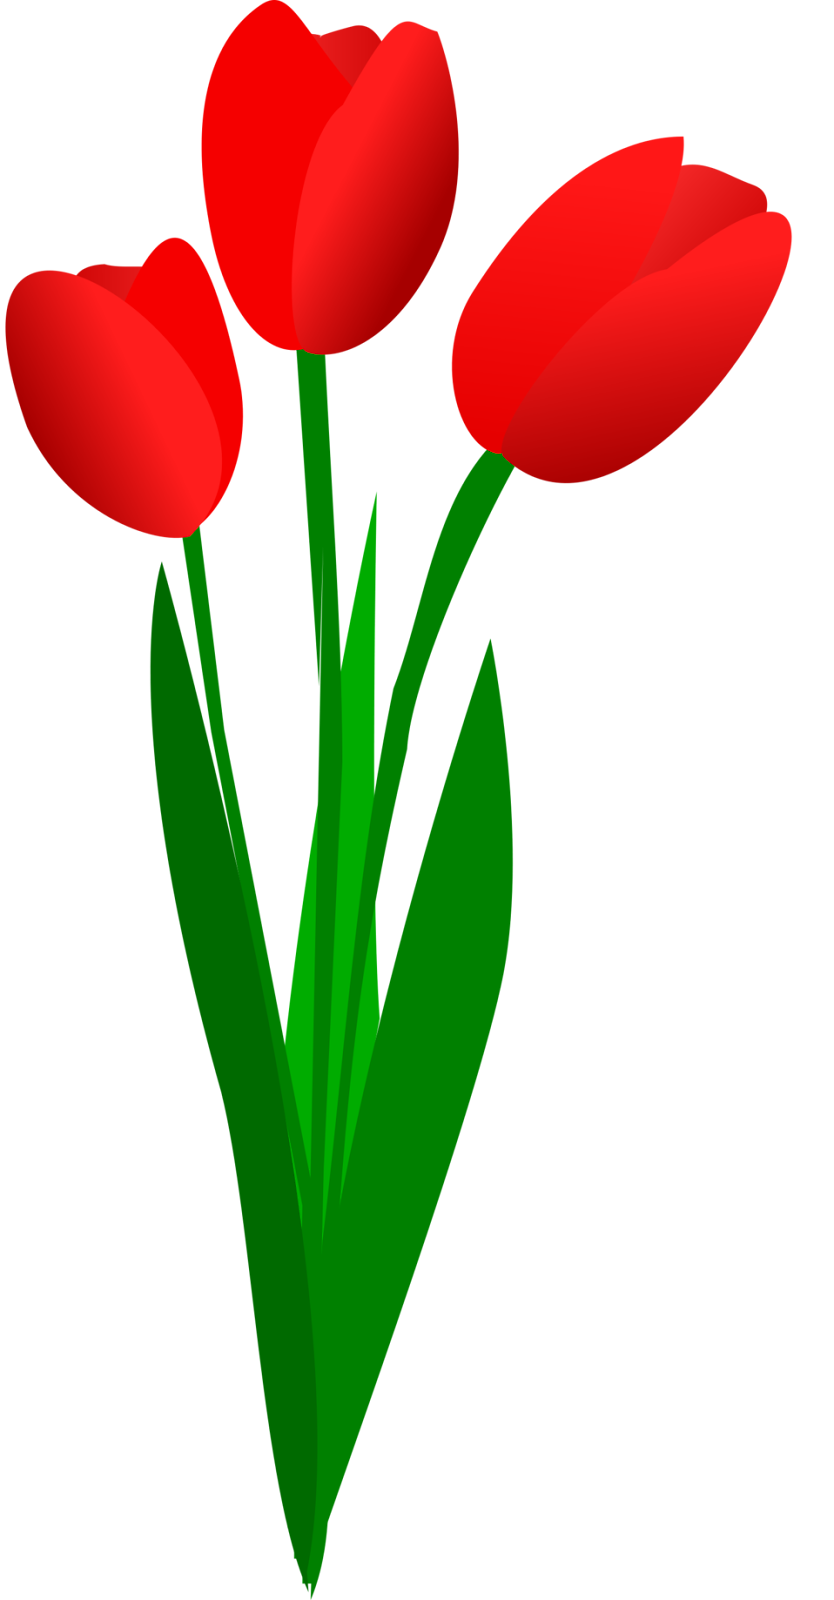 Illustration of red tulips